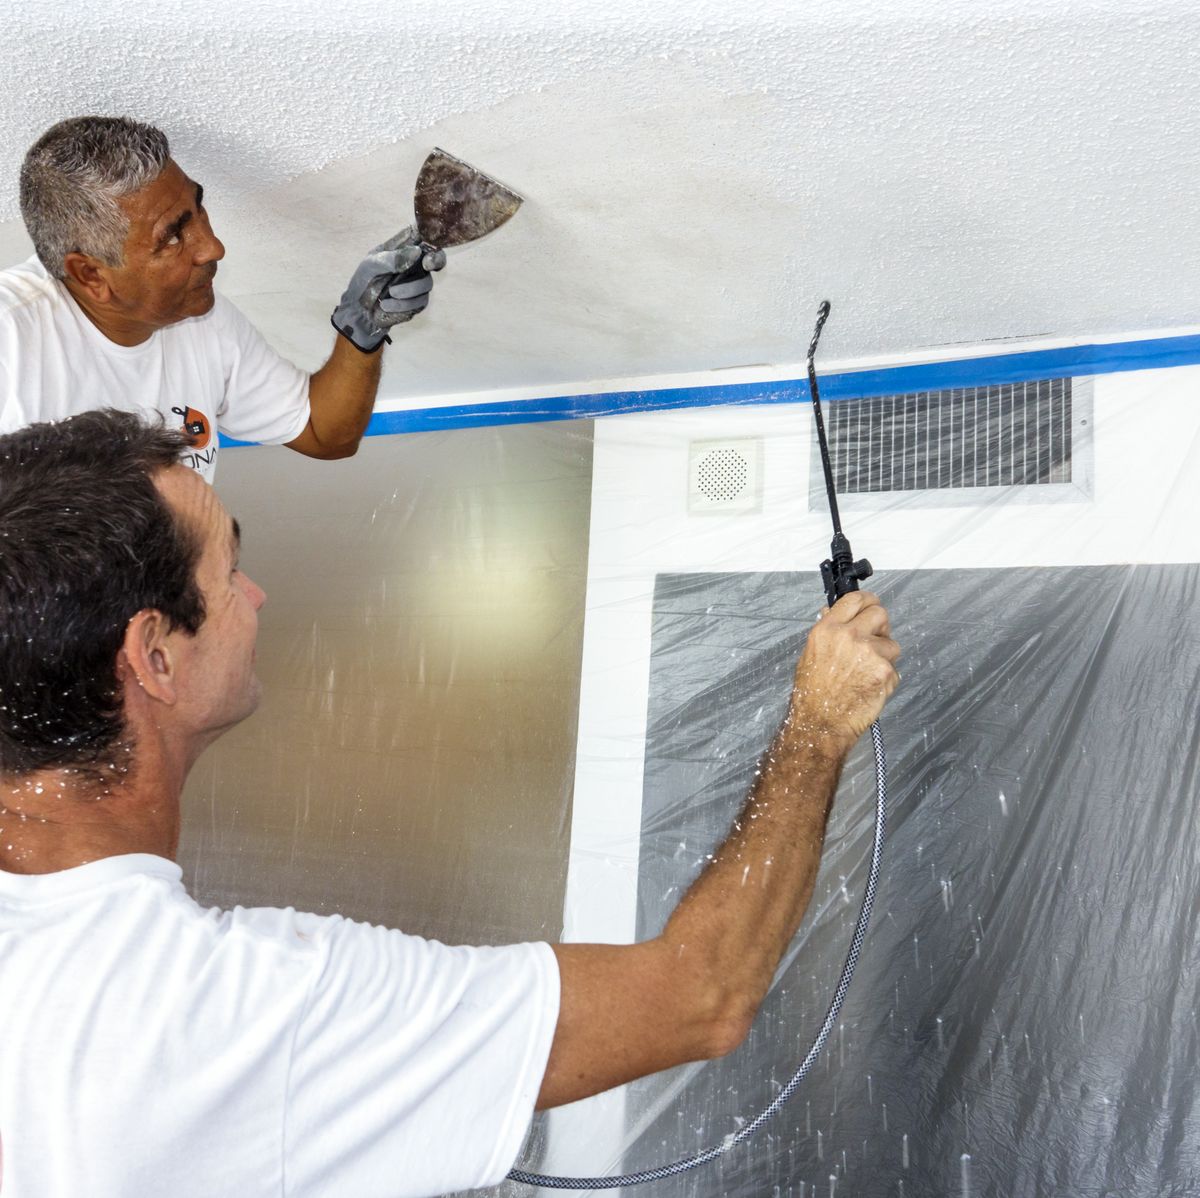 https://hips.hearstapps.com/hmg-prod/images/florida-miami-beach-contractors-removing-popcorn-ceiling-news-photo-929096442-1548384957.jpg?crop=0.668xw:1.00xh;0.167xw,0&resize=1200:*